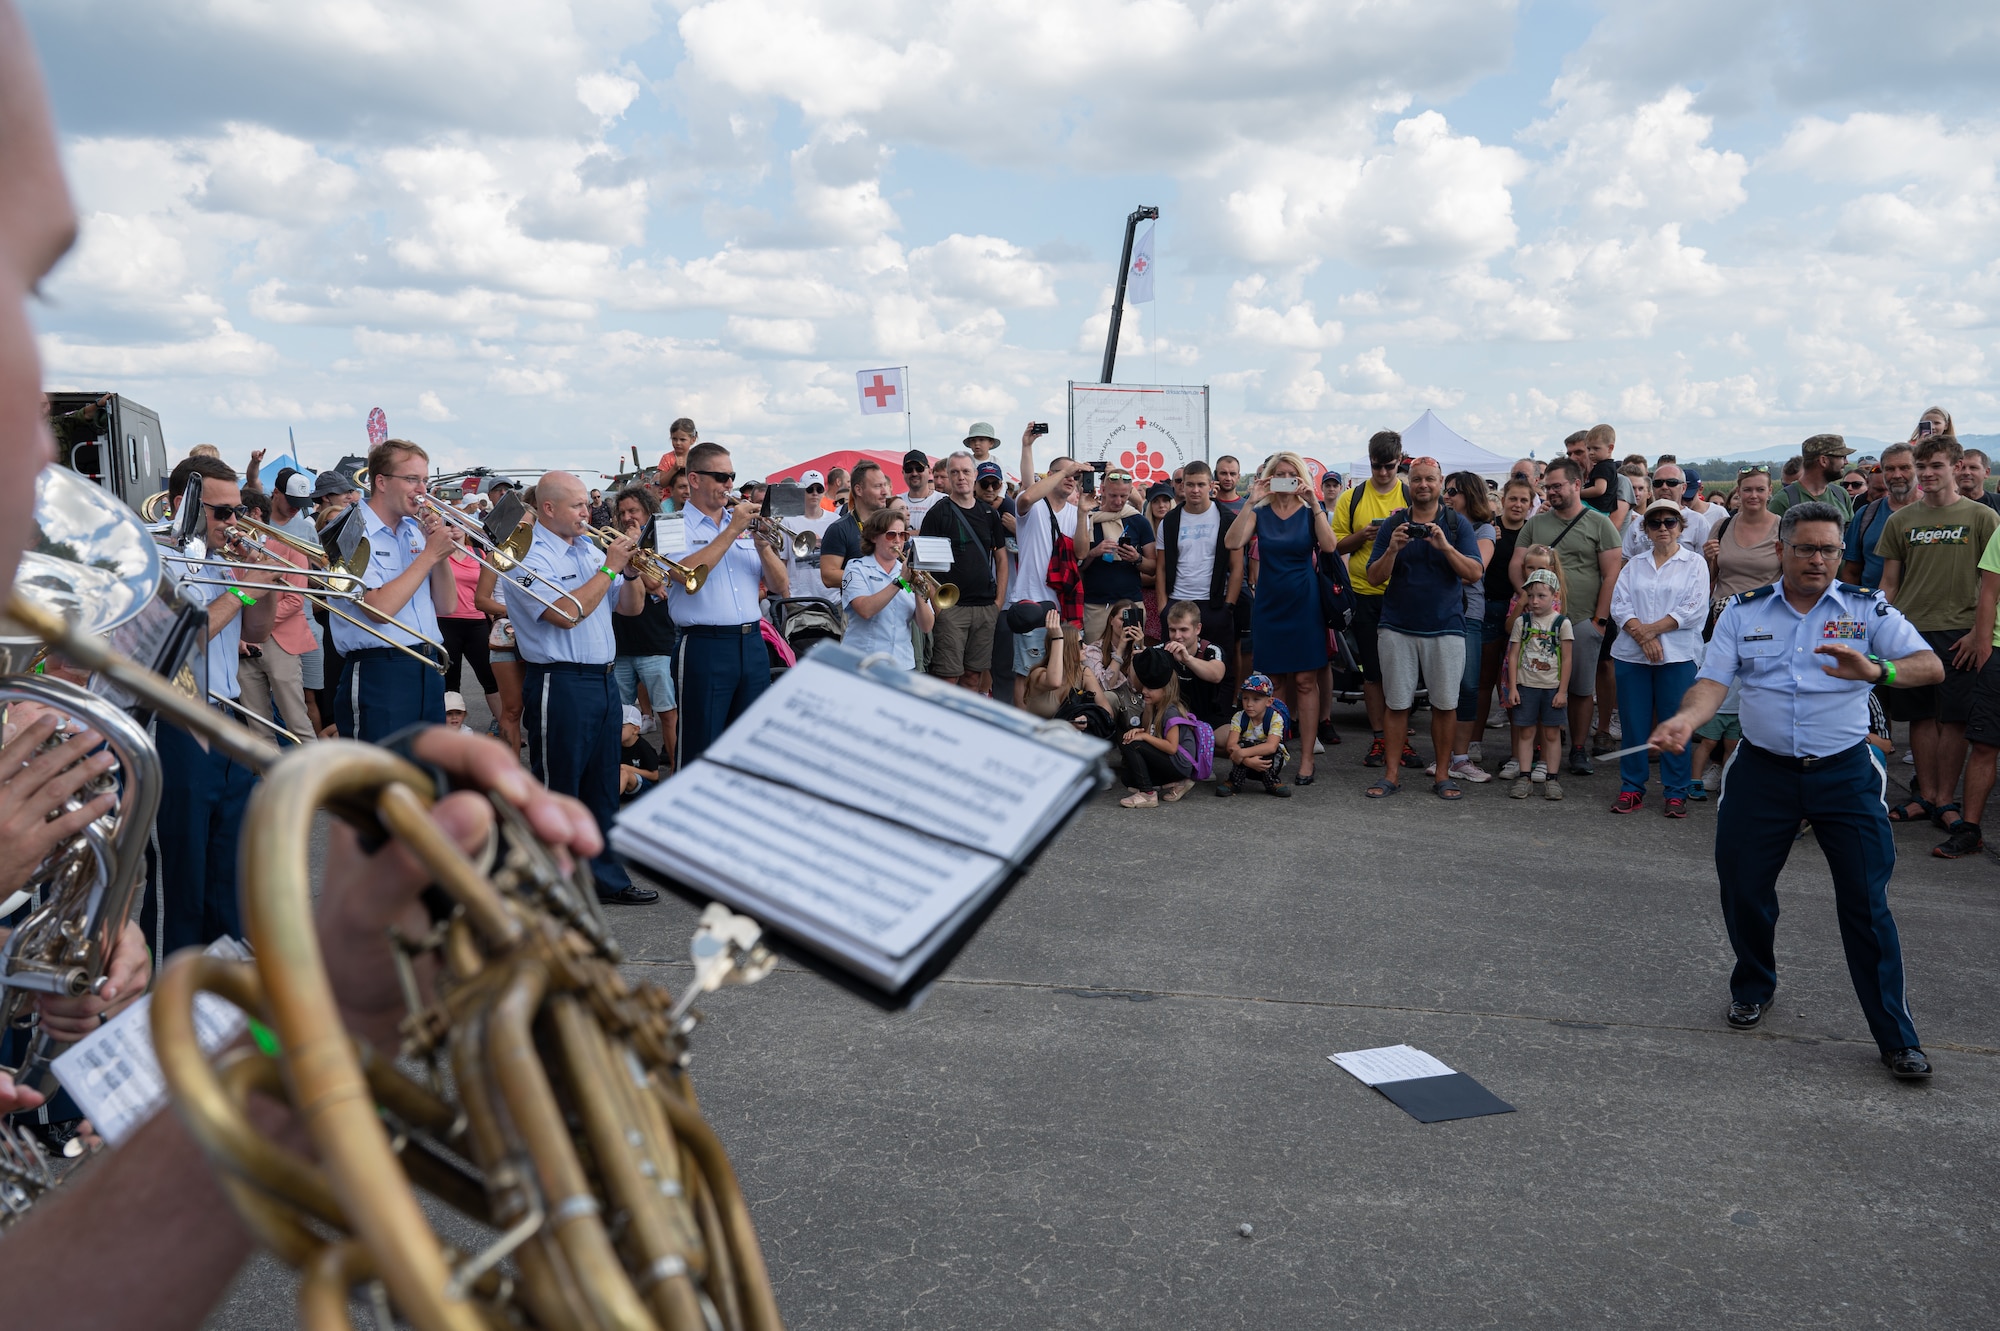 U.S. Air Force Airmen assigned to the U.S. Air Forces in Europe Ceremonial Band perform during the NATO Days event, at Leoš Janáček Airport in Ostrava, Czech Republic, Sept. 17, 2023.